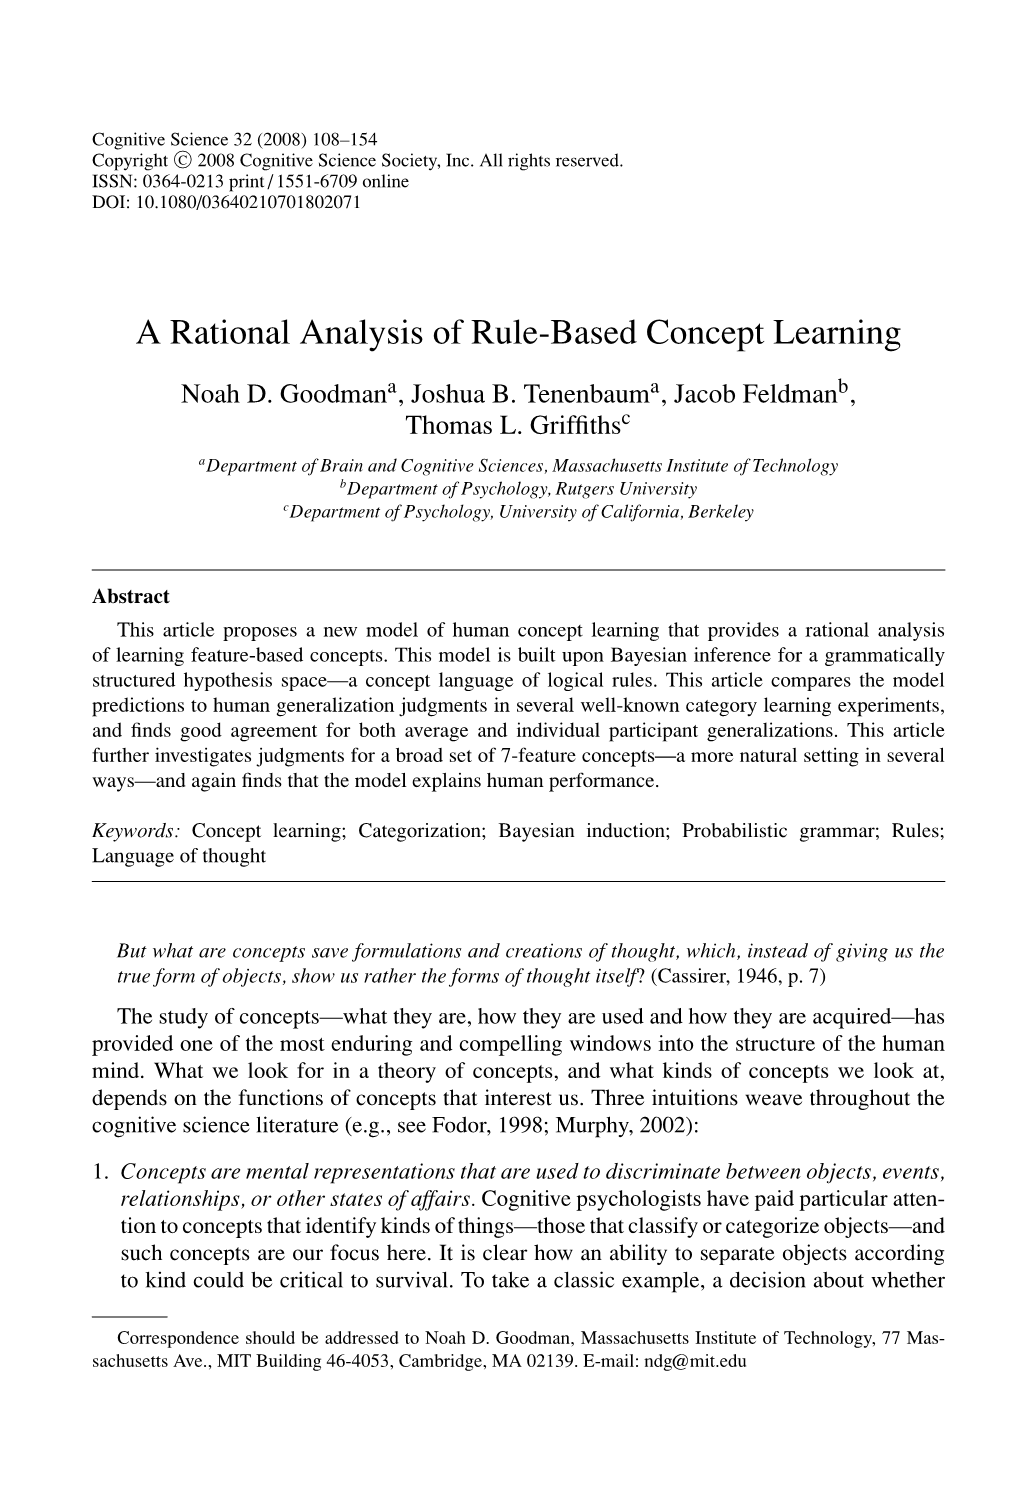 A Rational Analysis of Rule-Based Concept Learning